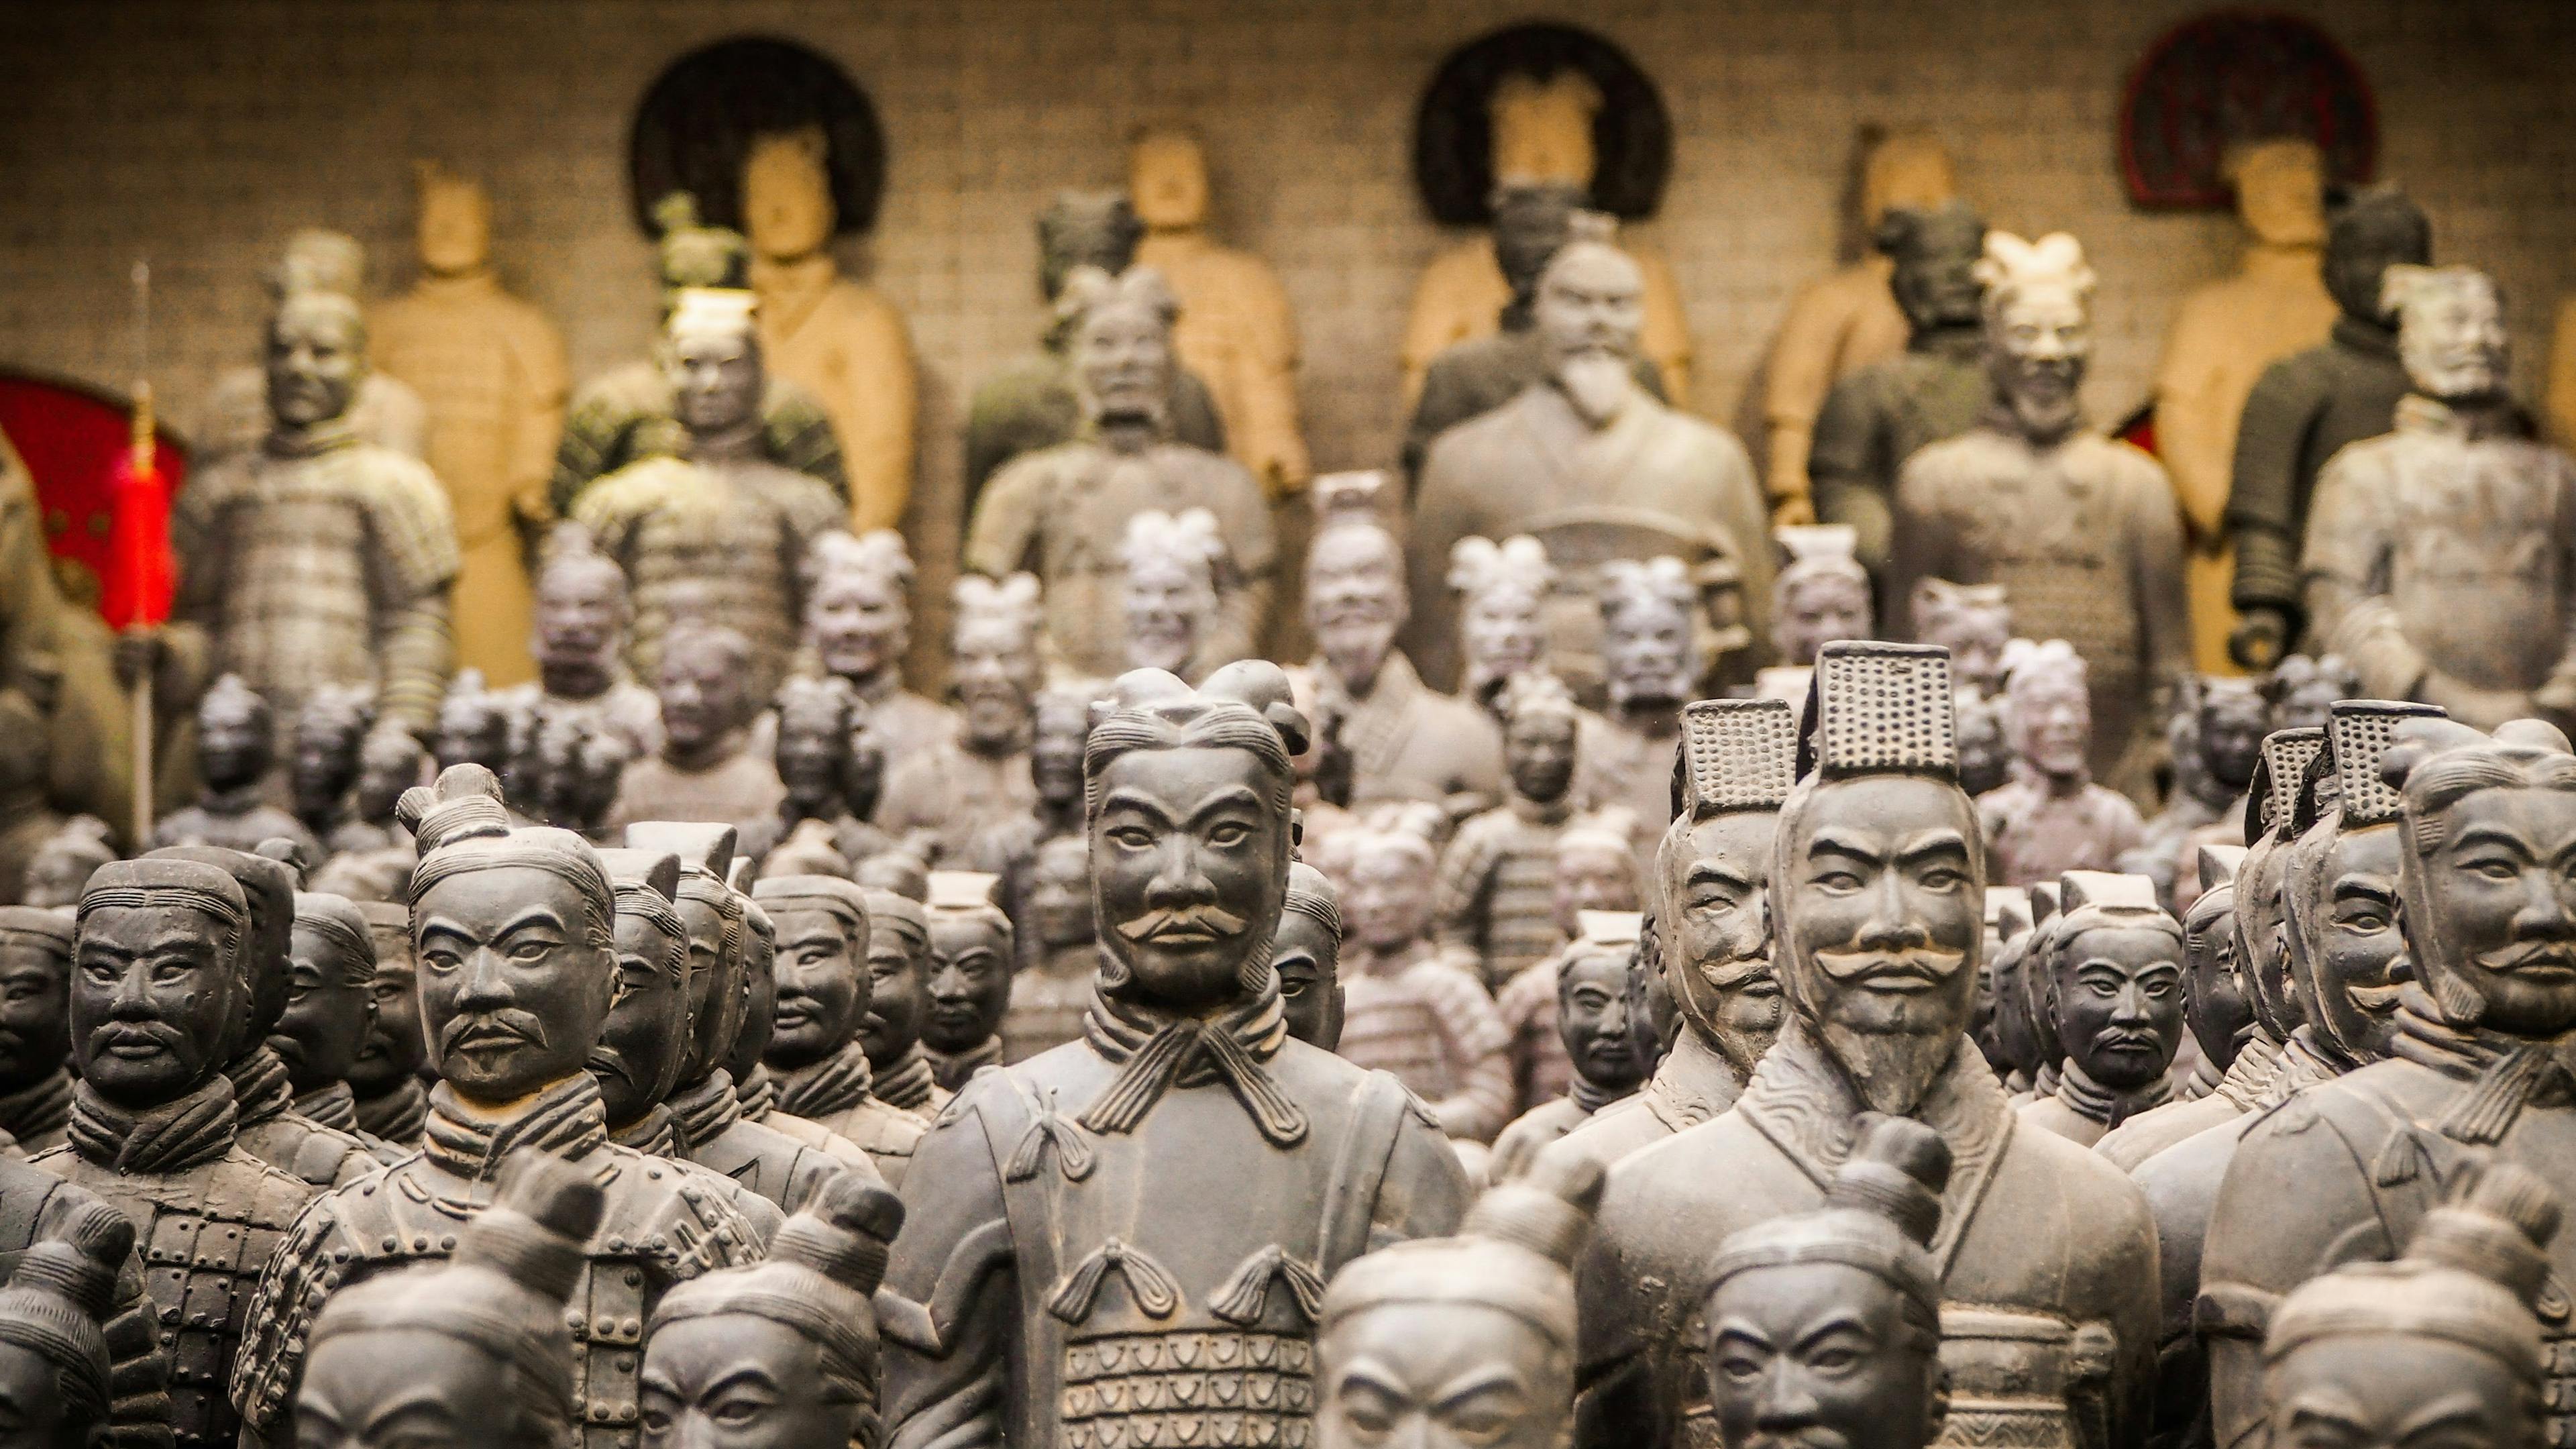 Statues of Terracotta Army in China.